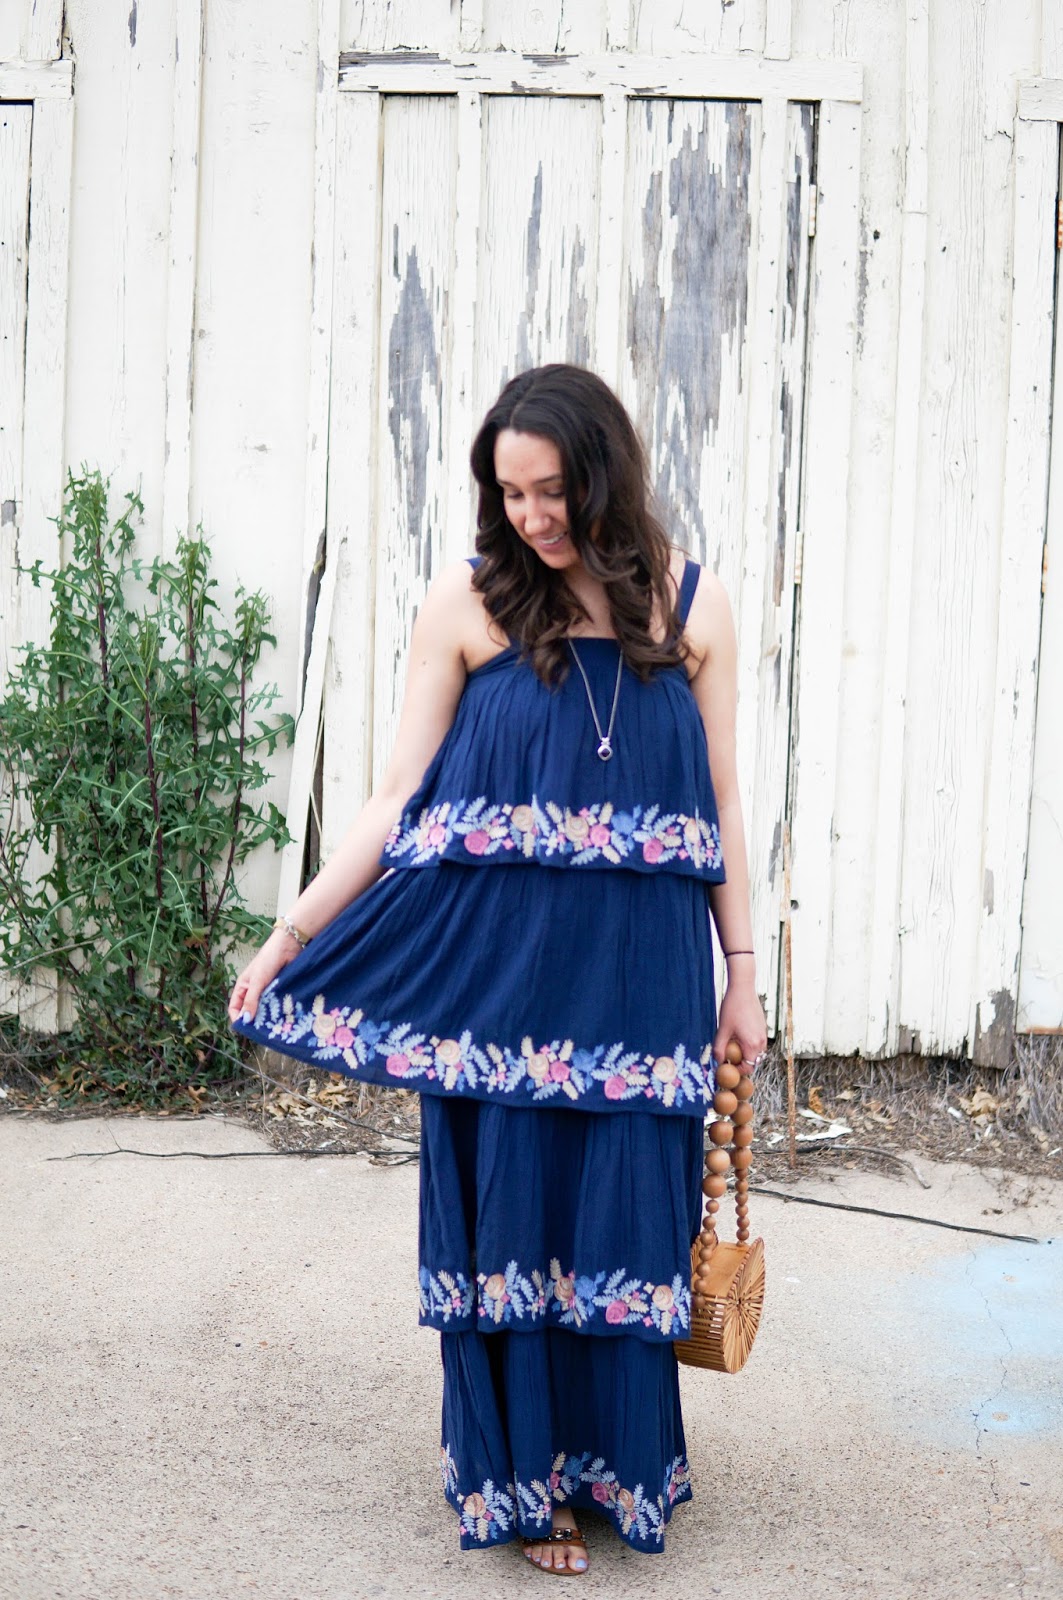 Amelia B. in the Big D.: Dress 17: Embroidered Maxi Dress